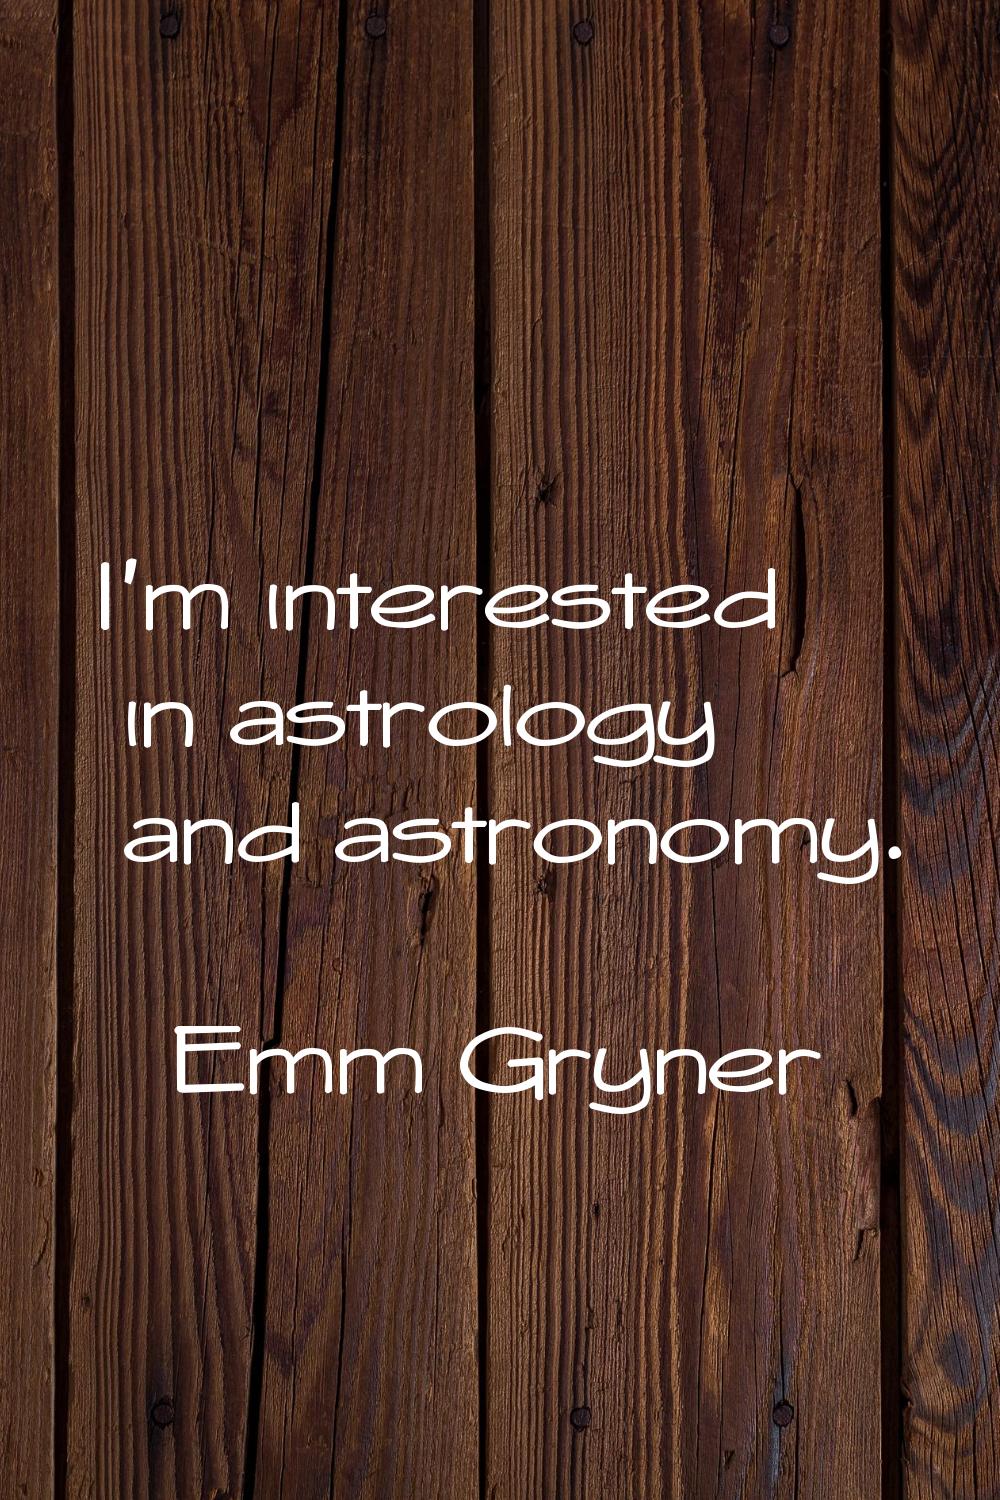 I'm interested in astrology and astronomy.